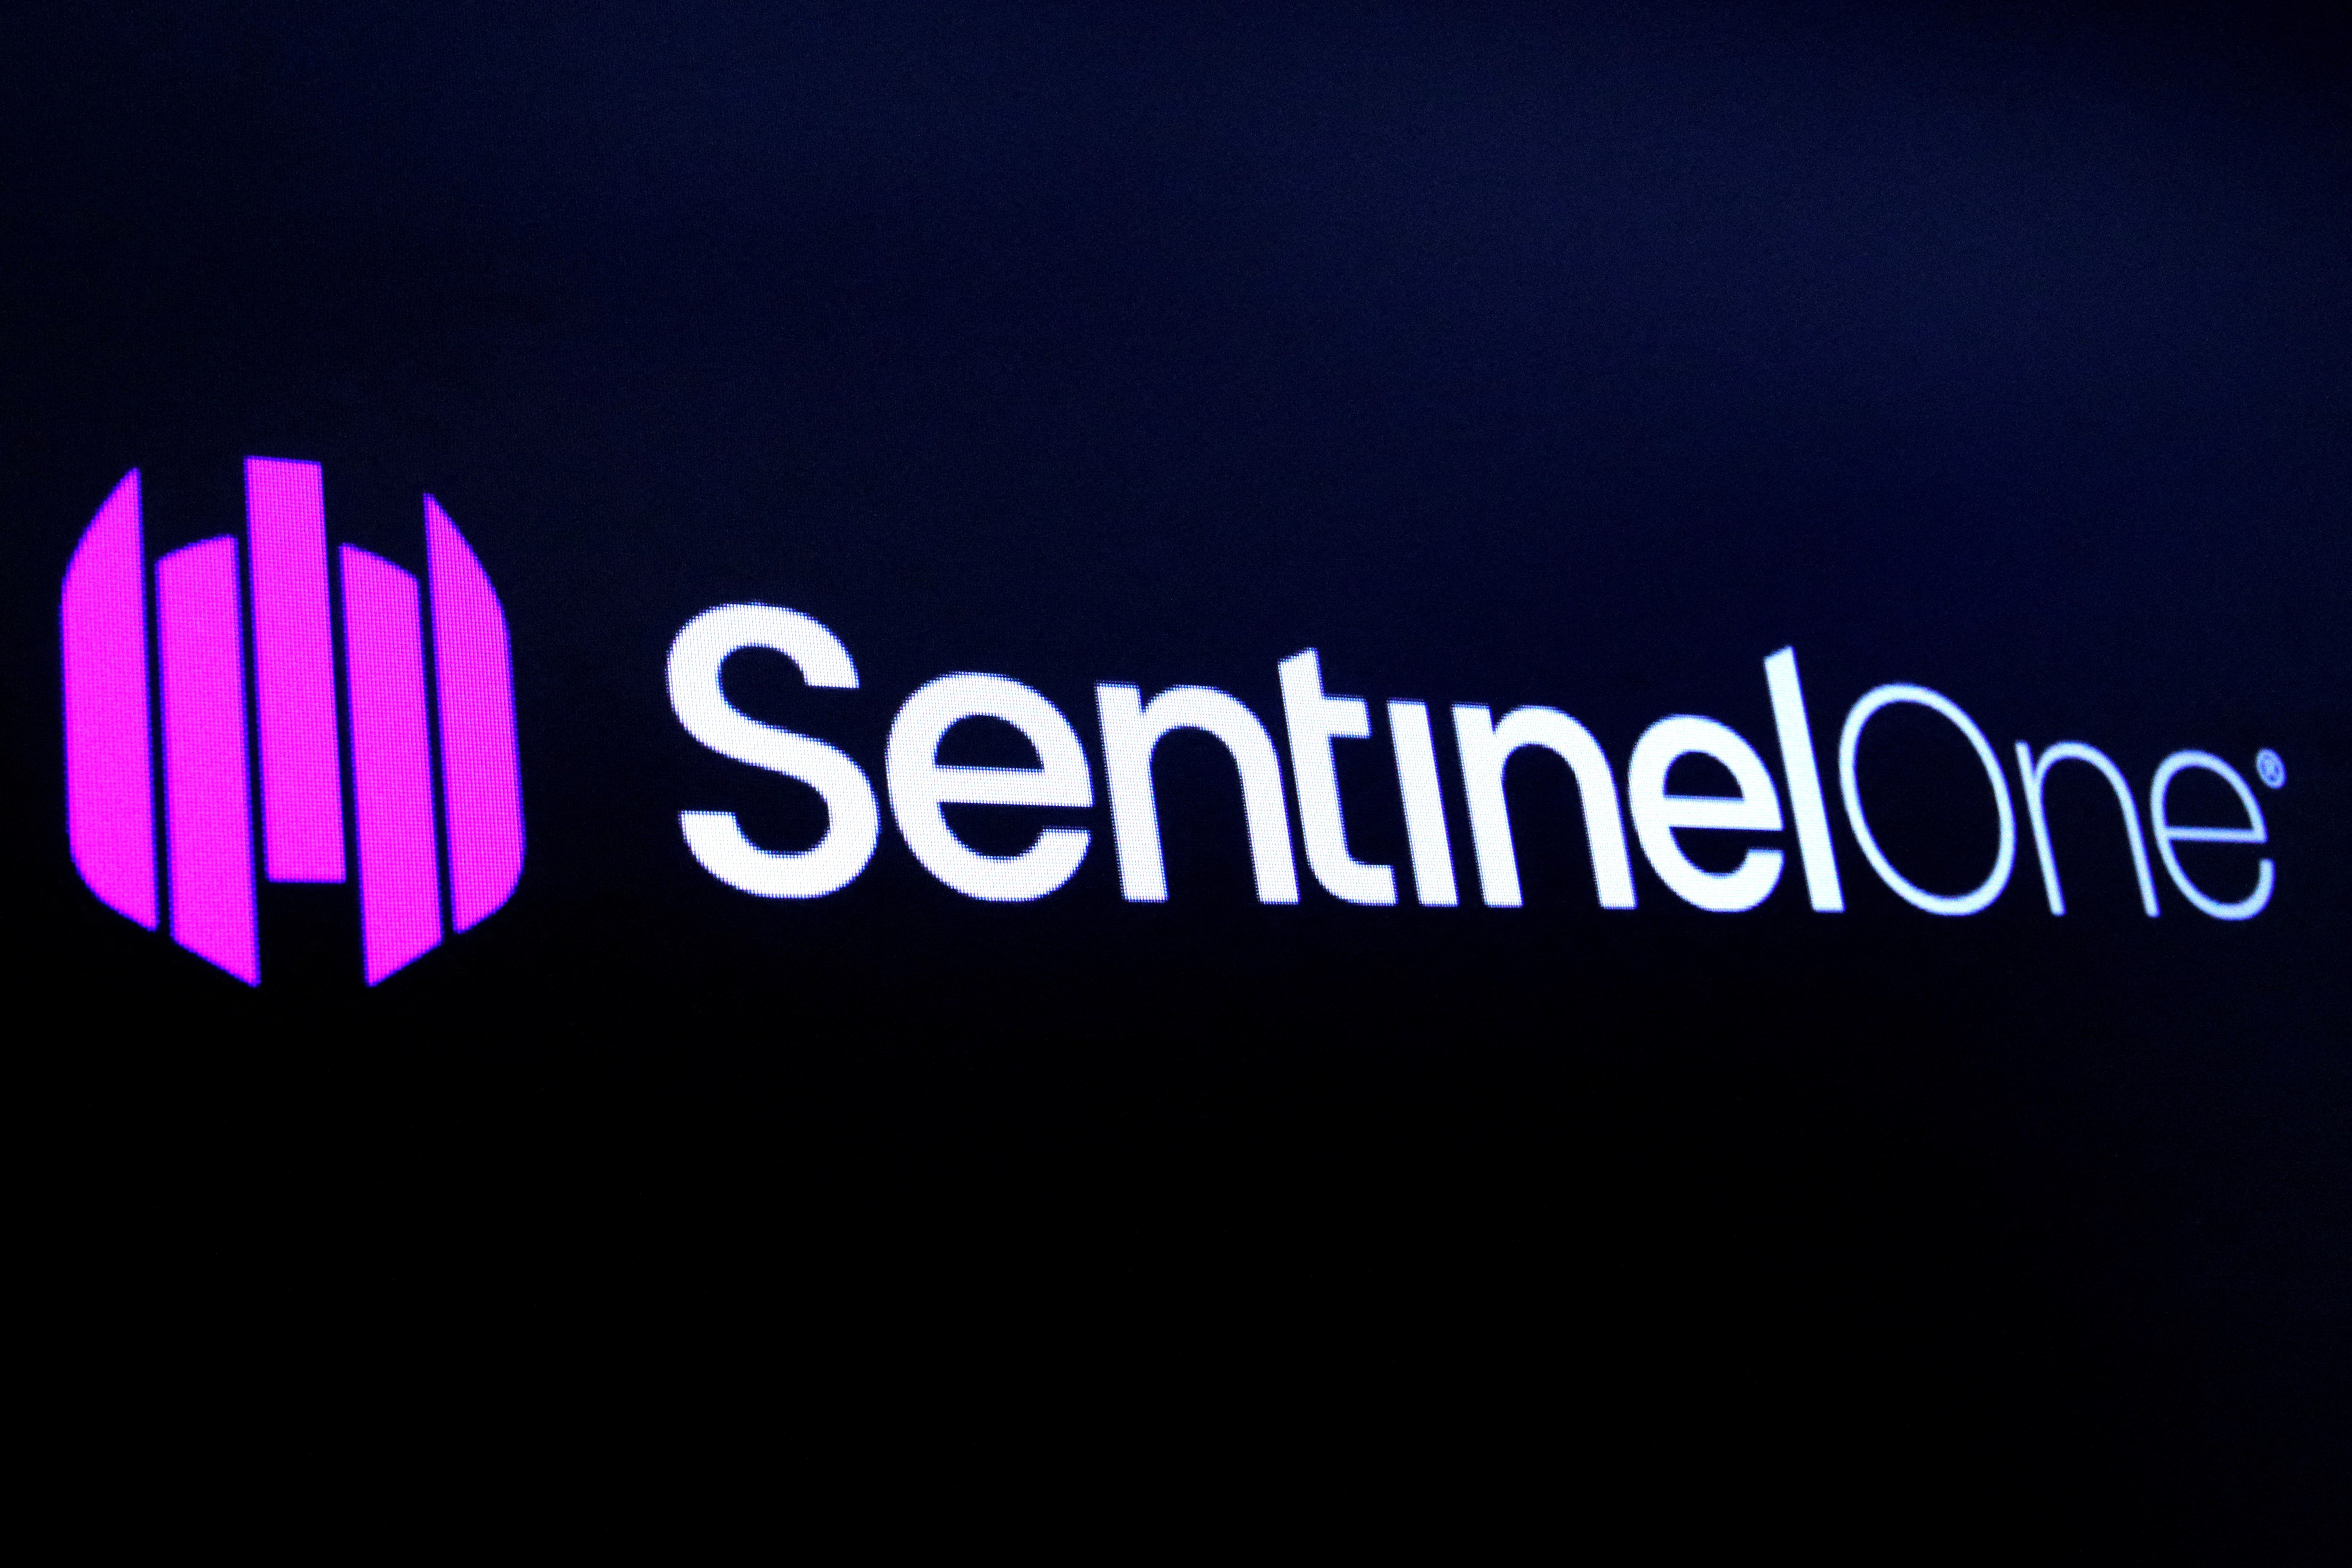 The logo for SentinelOne Inc, a cybersecurity firm, is displayed on a screen during the company’s IPO at the NYSE in New York